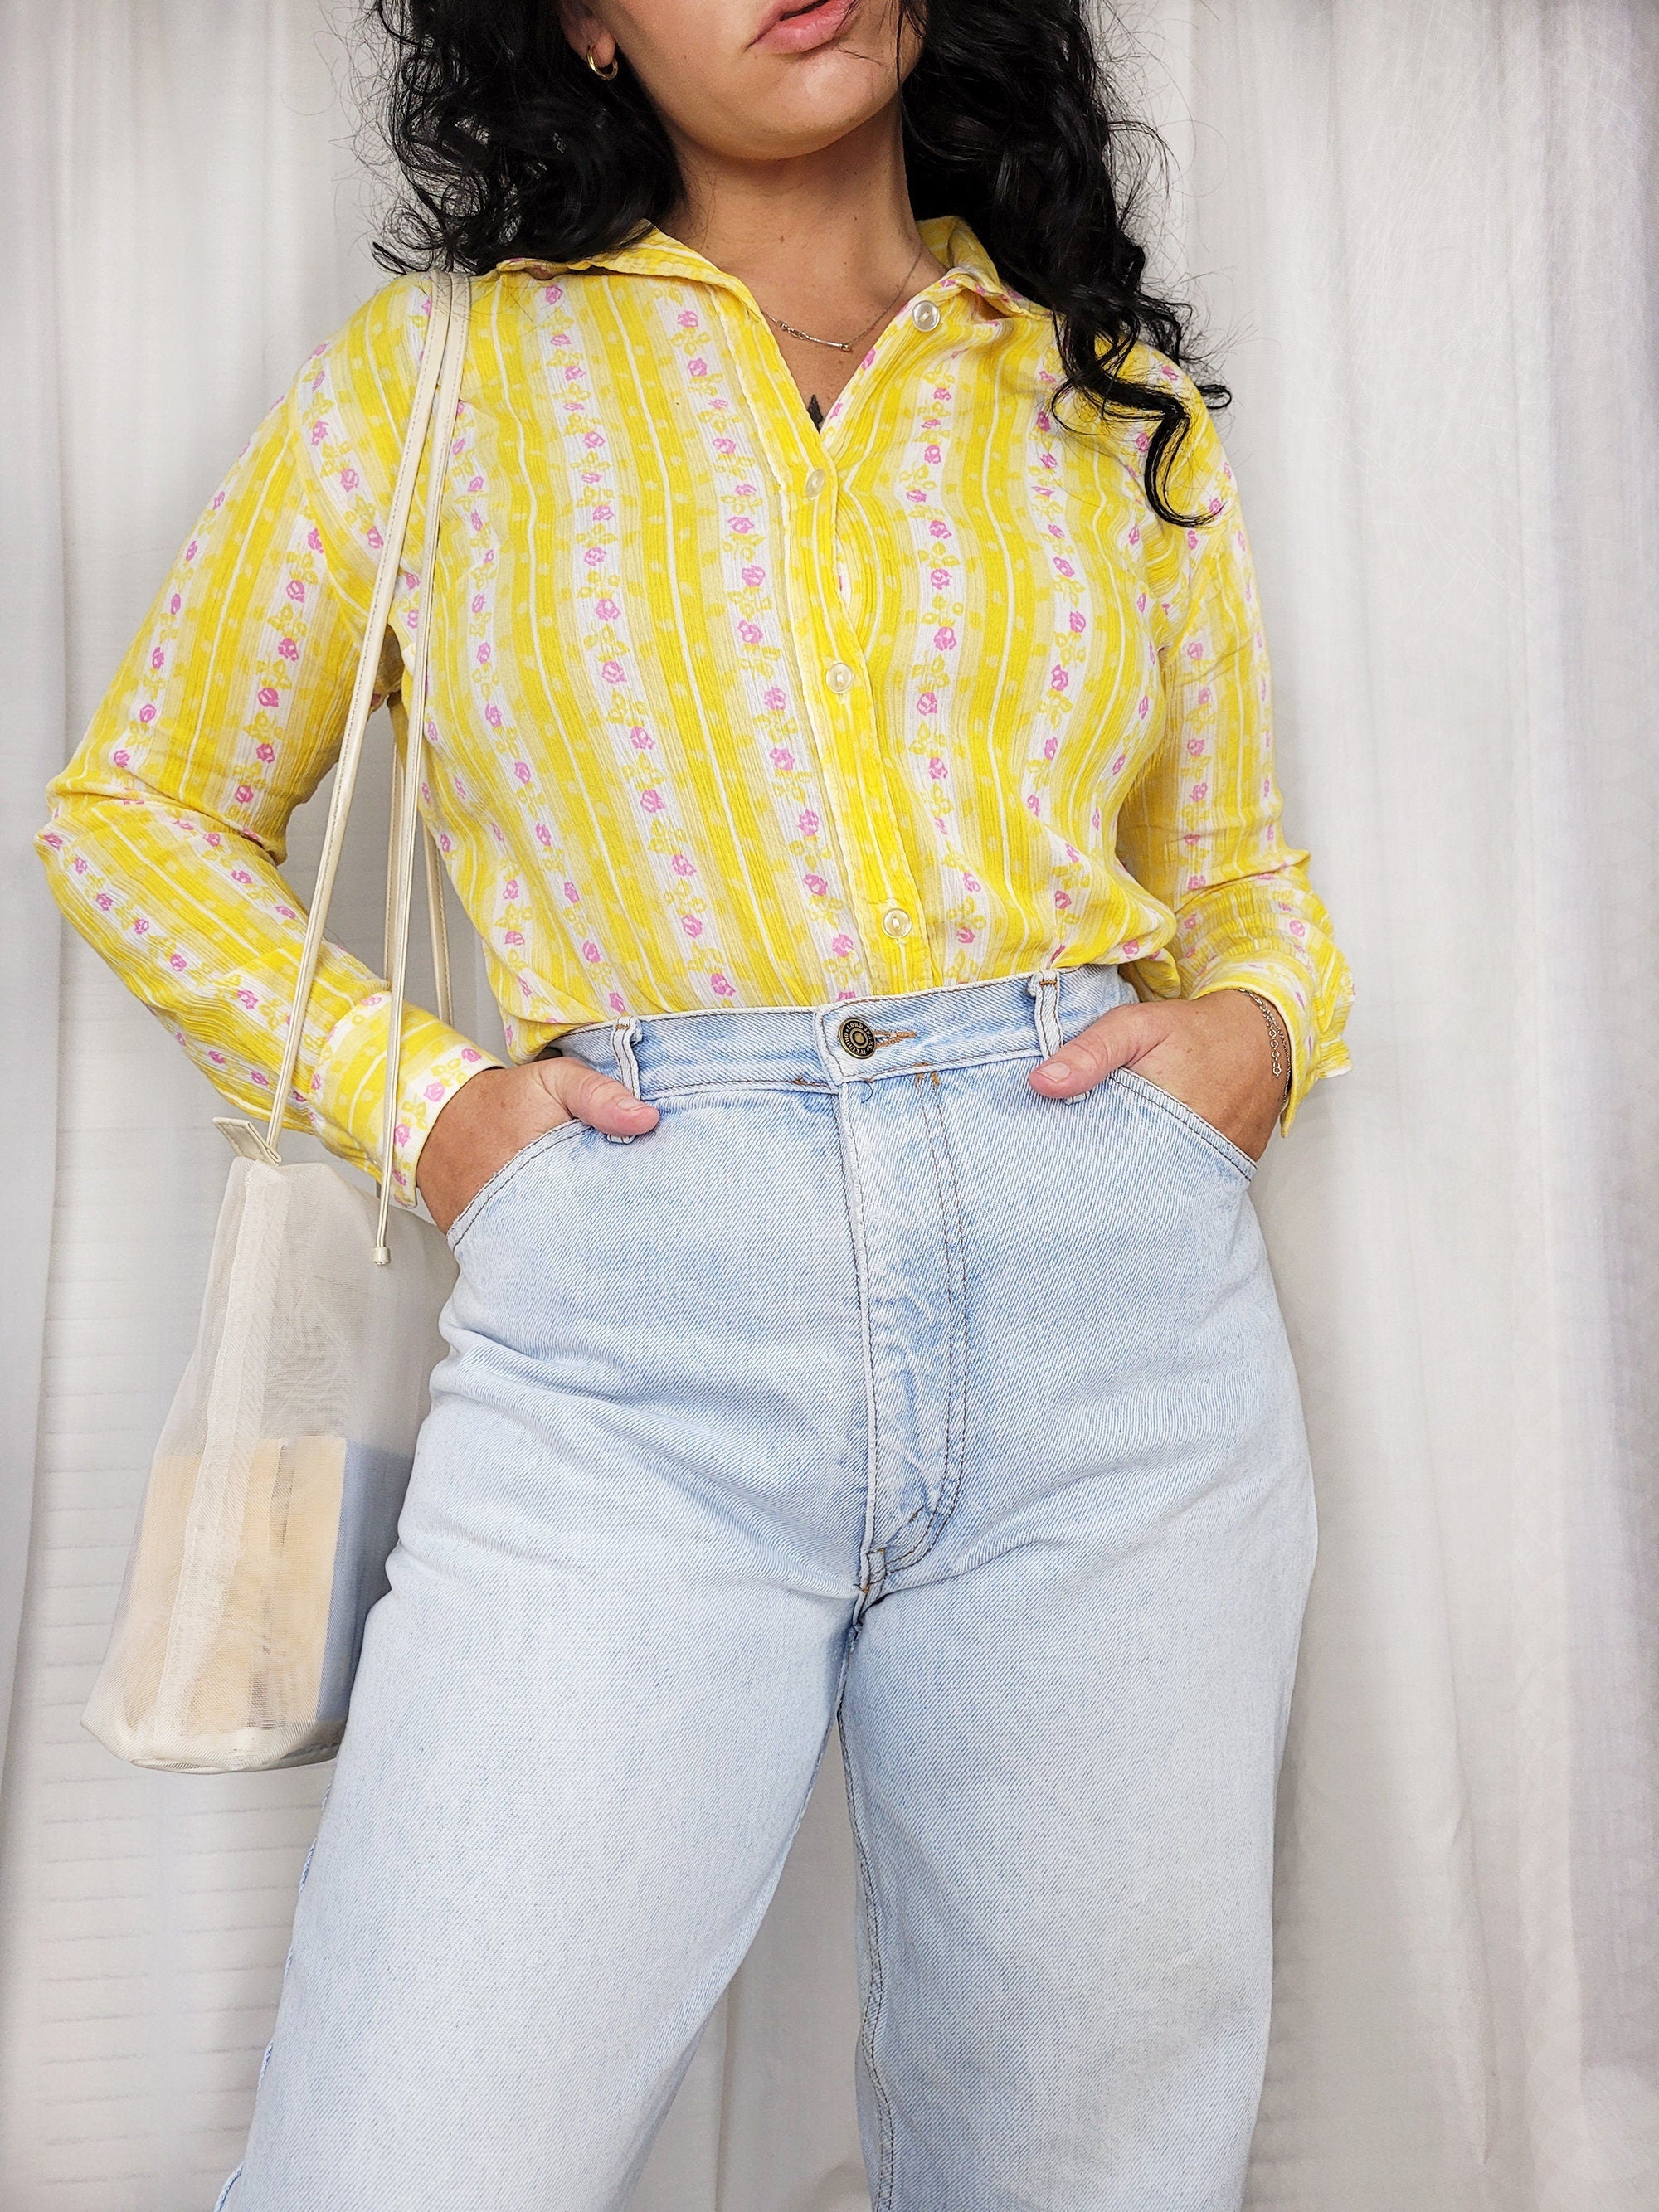 Vintage 90s colorful yellow striped minimalist shirt top